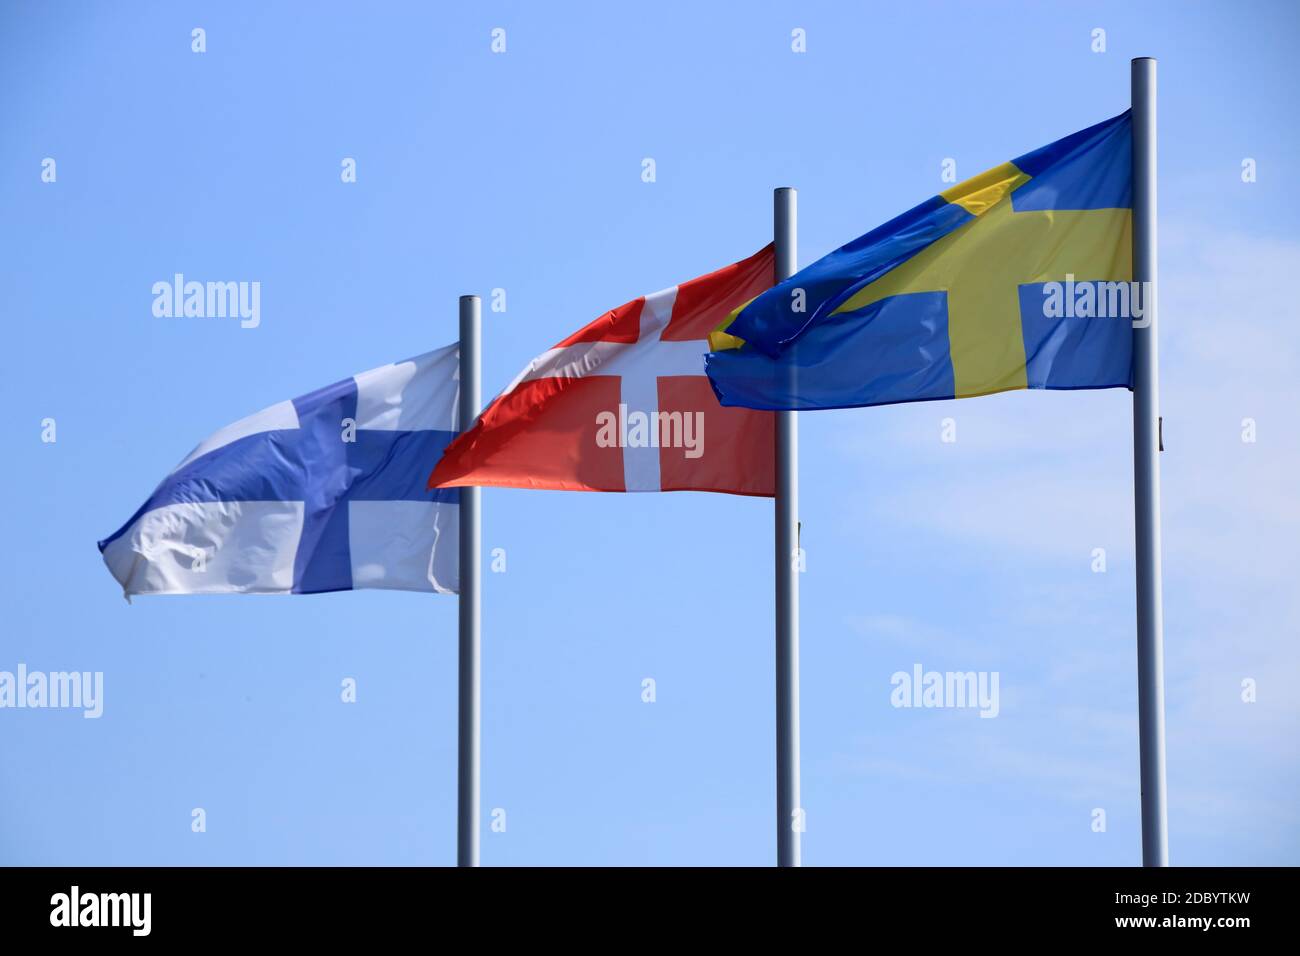 Flags blow in the wind against a blue sky Stock Photo